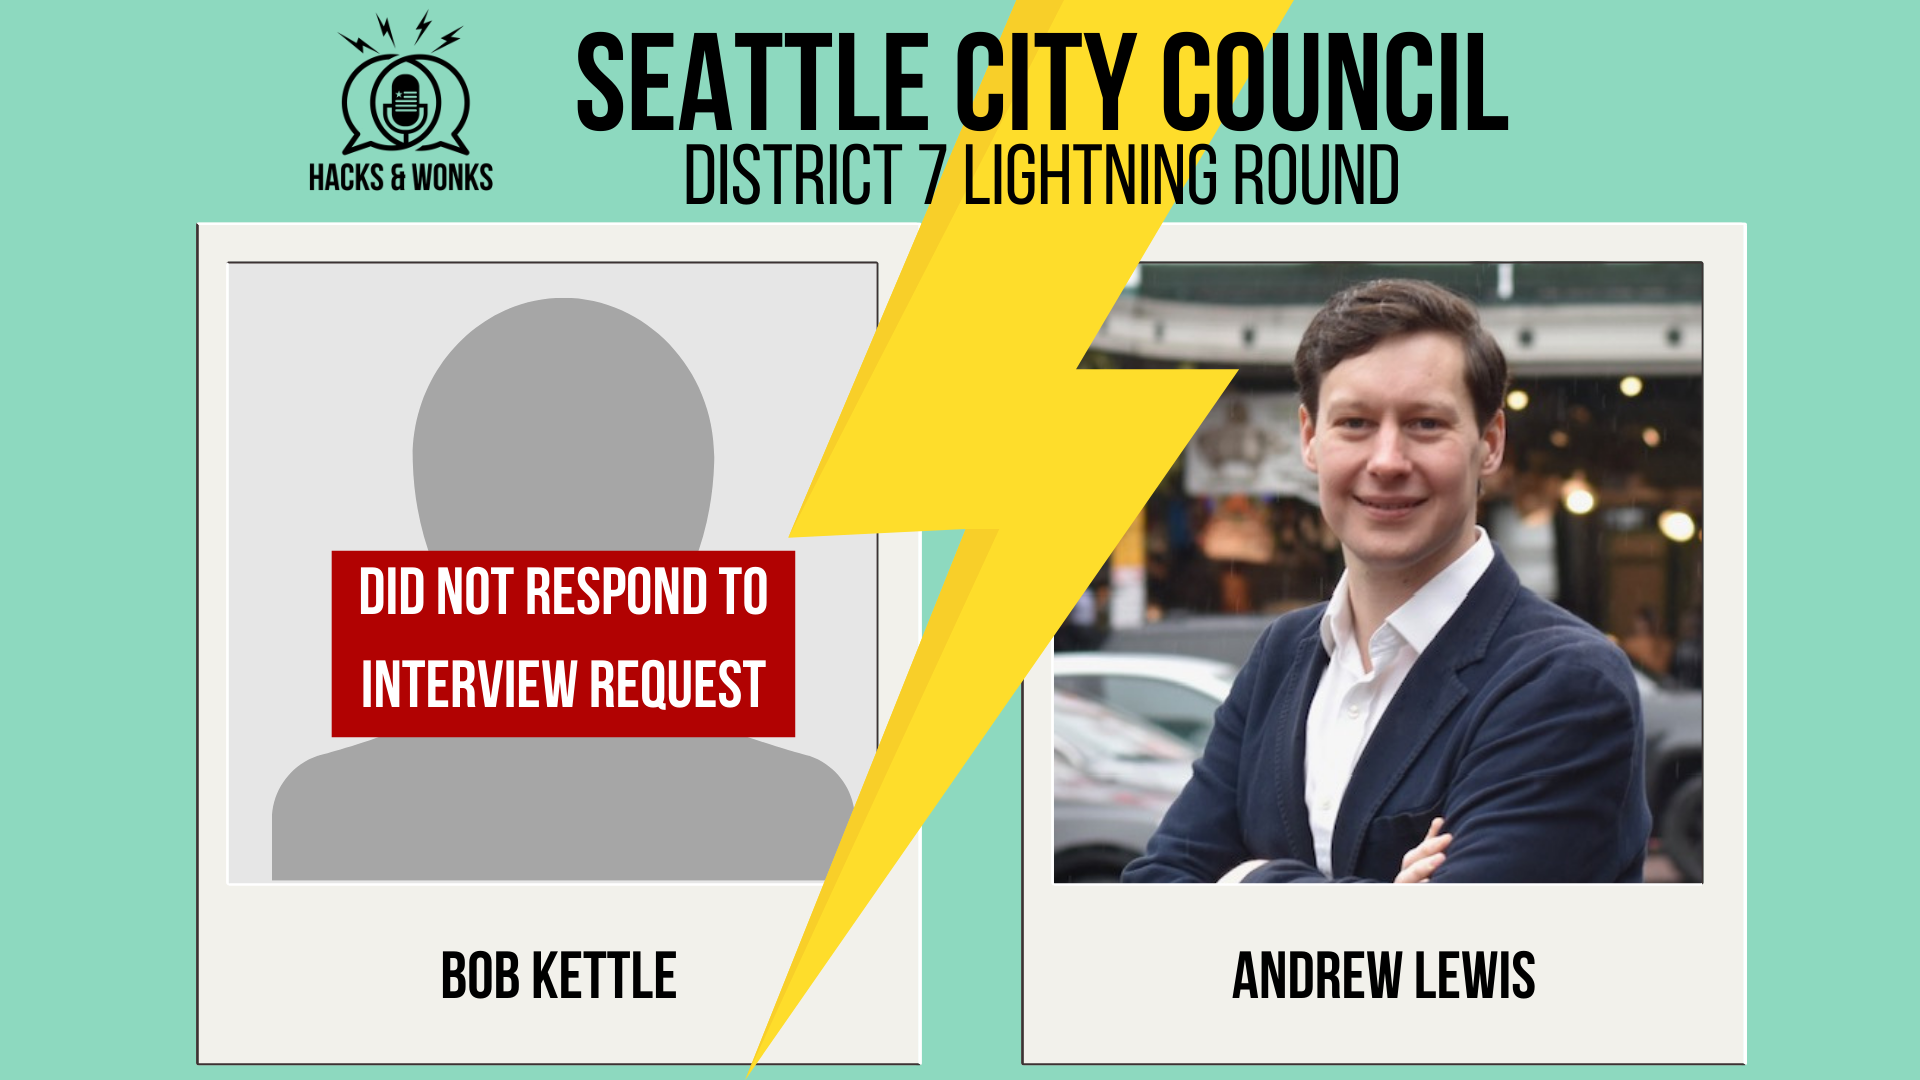 Lightning bolt divides District 7 candidates: Bob Kettle (placeholder image with “DID NOT RESPOND TO INTERVIEW REQUEST” across it) and Andrew Lewis (campaign photo)